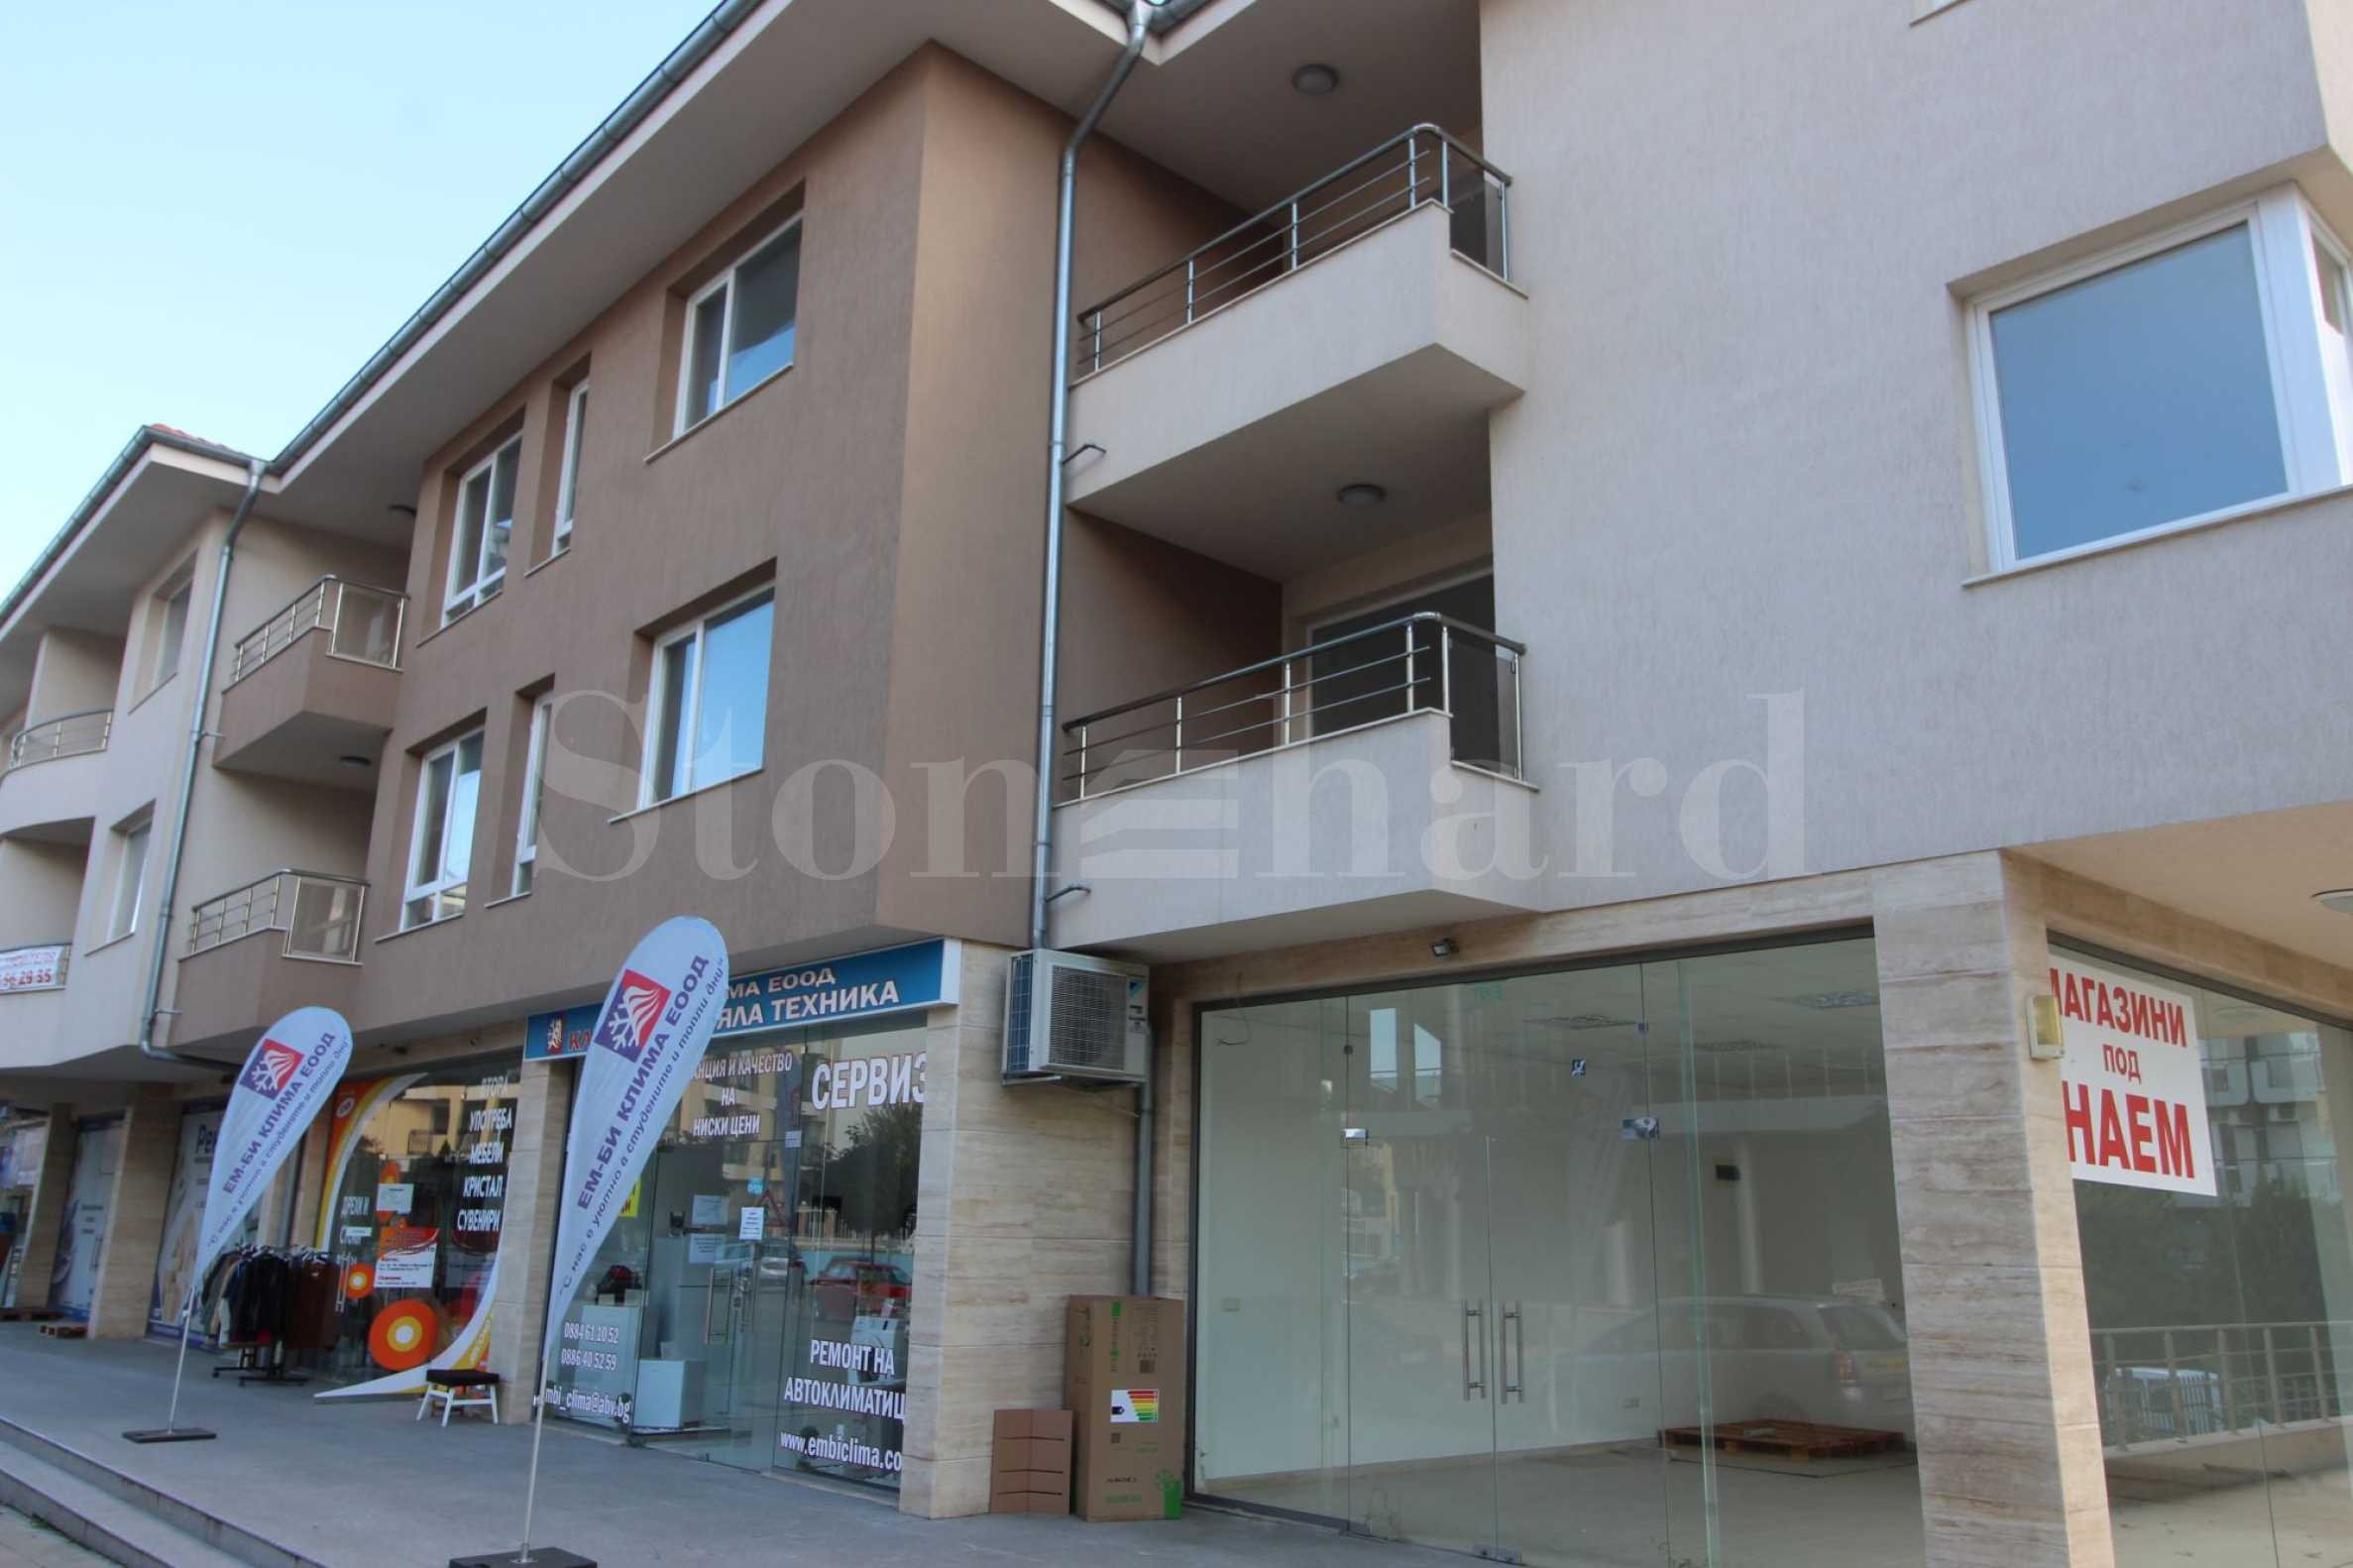 Turnkey apartments 200 meters from the beach, no maintenance fee2 - Stonehard